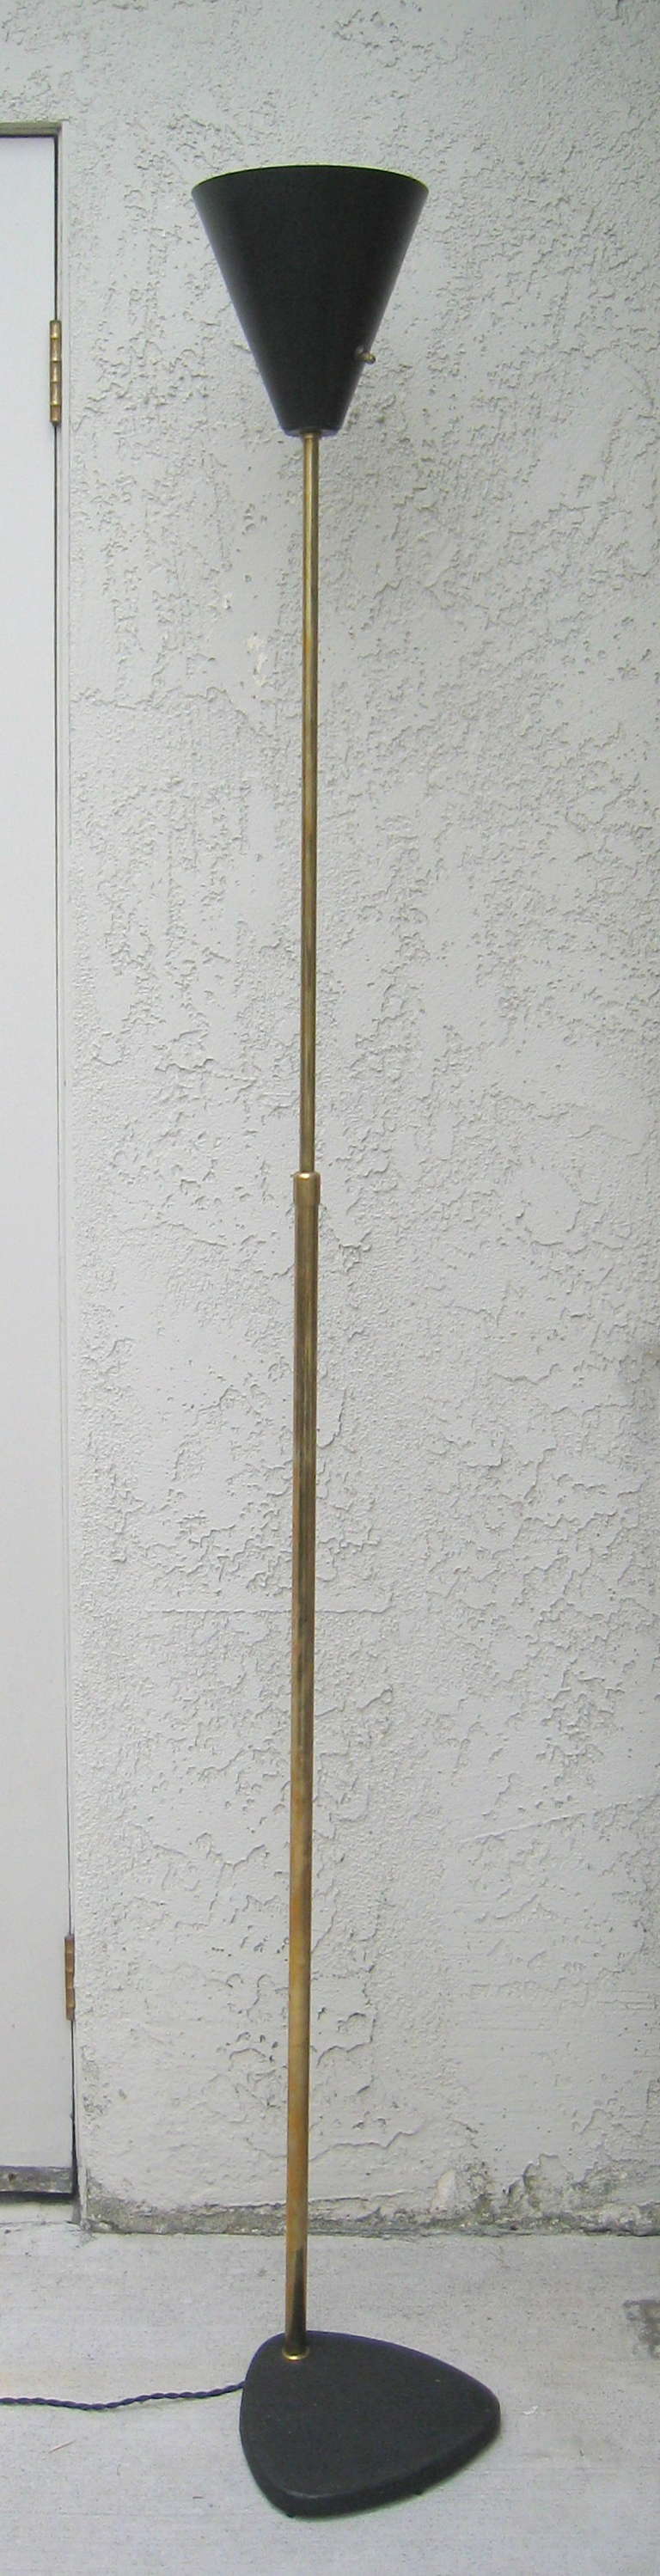 Single Cone Italian Floor Lamp   The Rod Adjusts in Height.  
Rewired